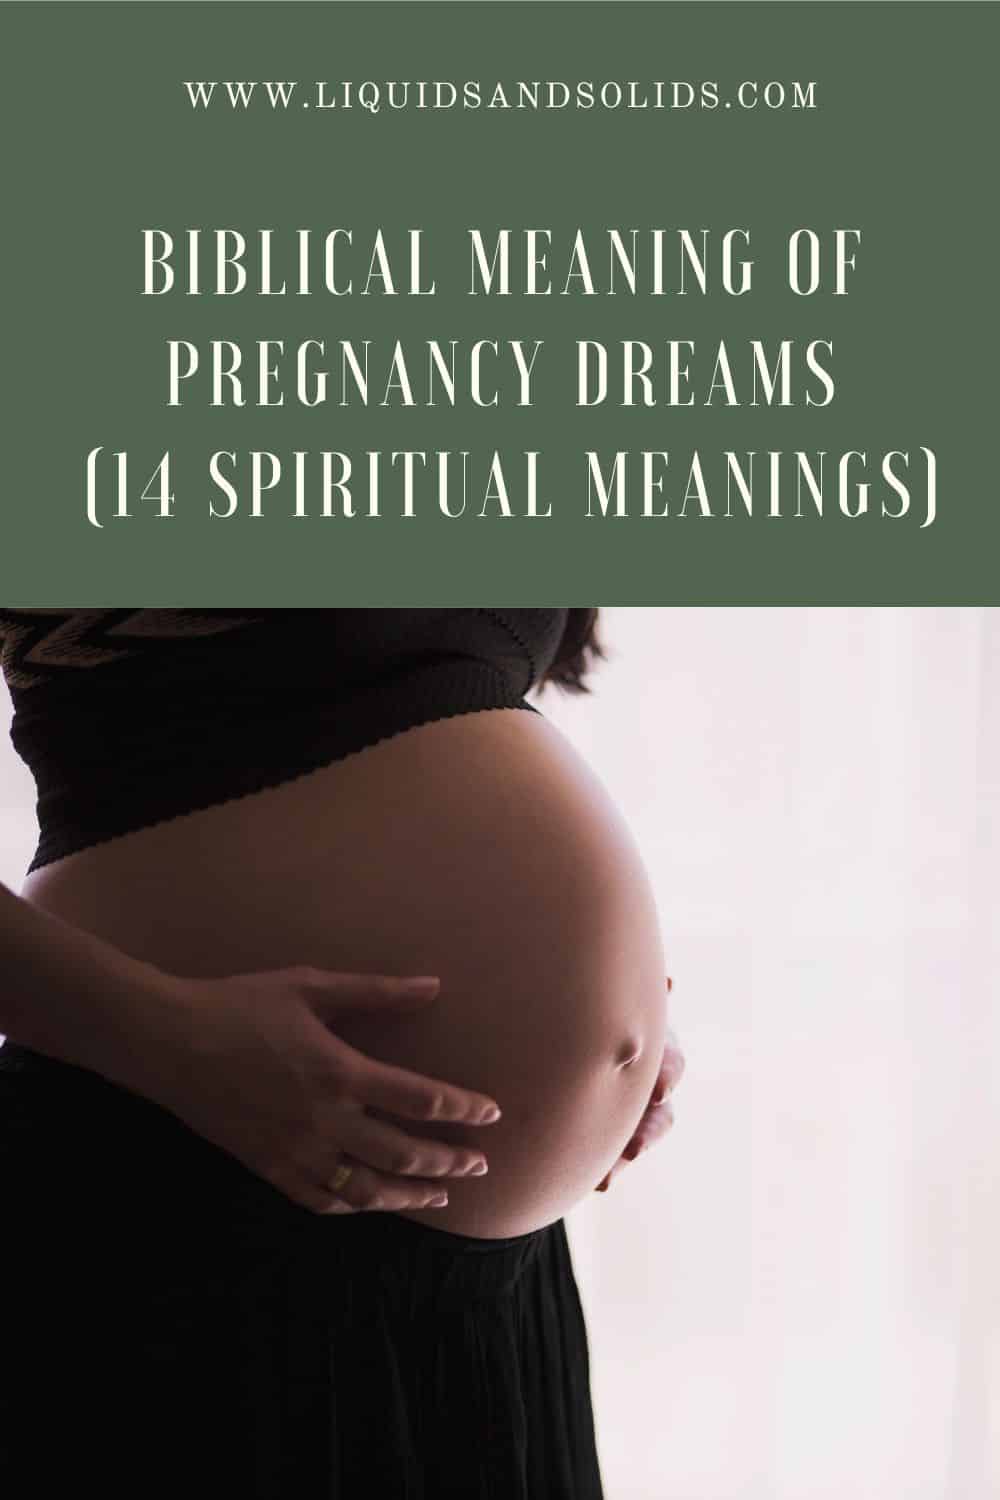 Biblical Meaning of Dreams about Pregnancy